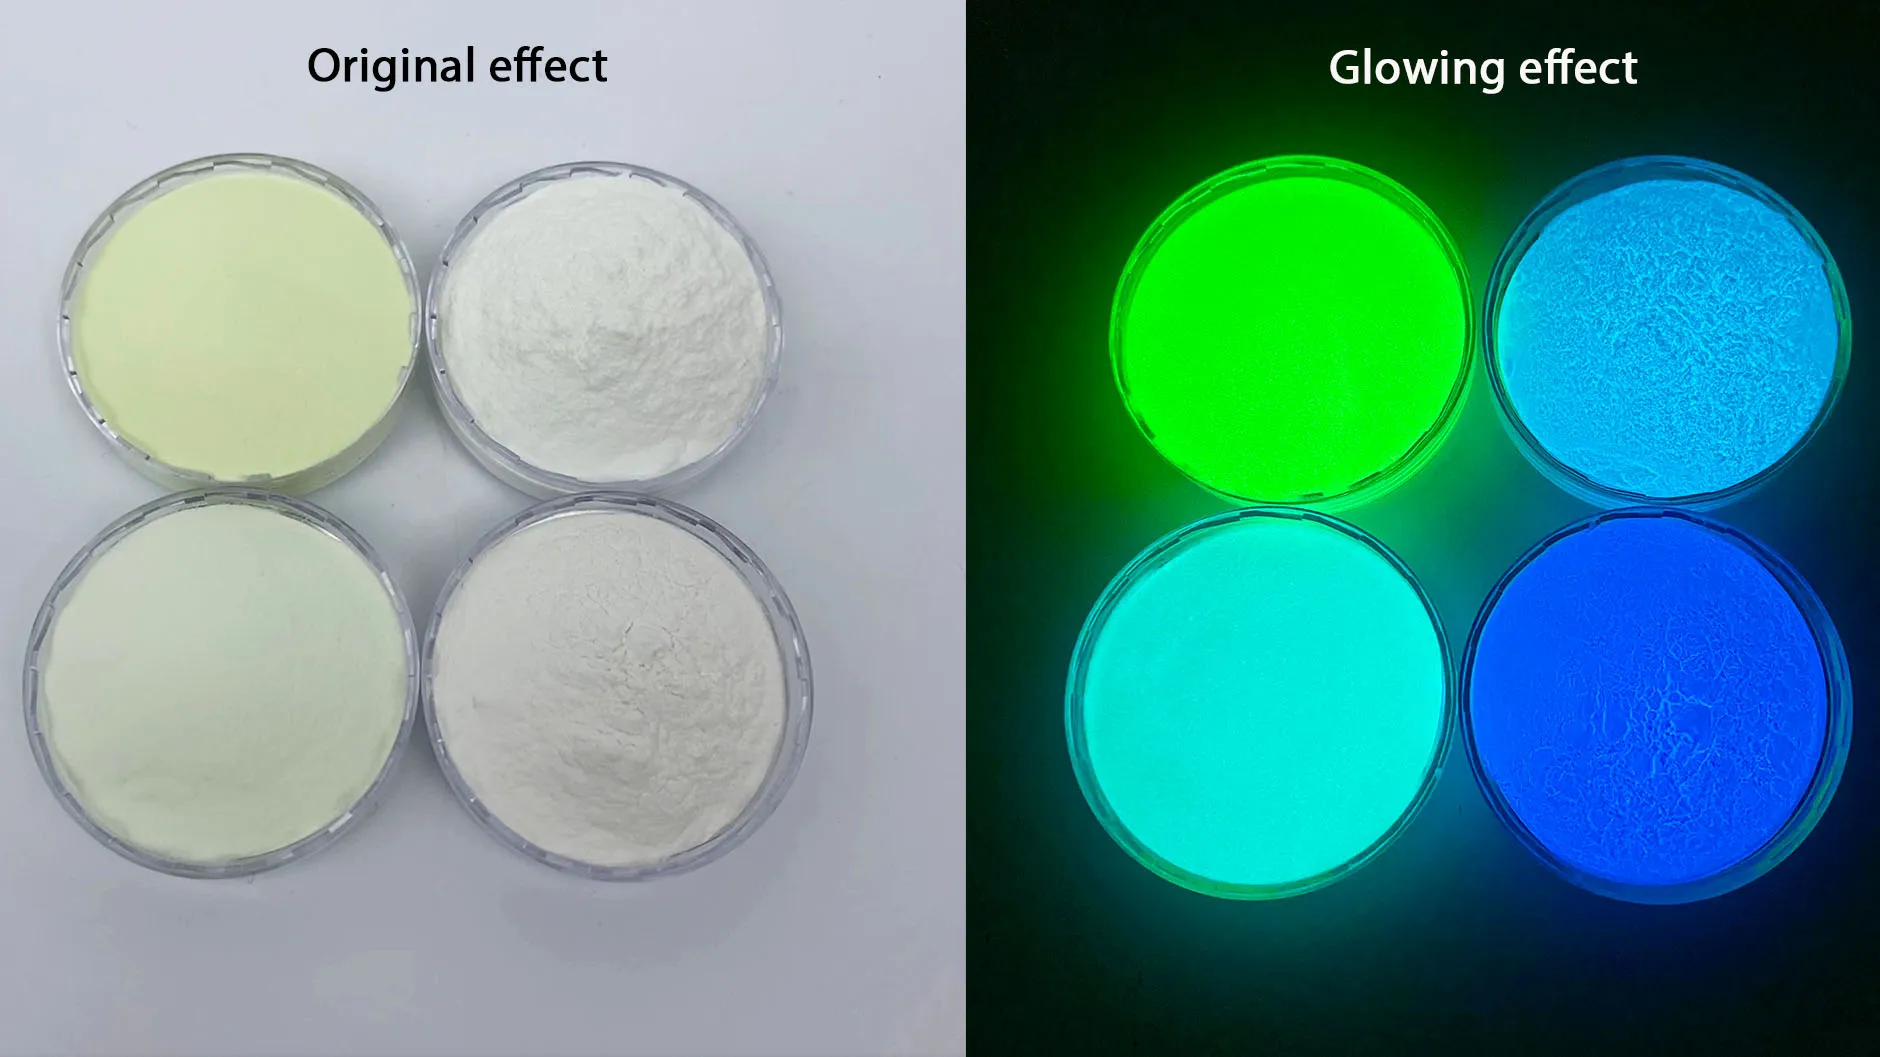 Non-toxic Glow in the dark car spray fluorescent pigment phosphor pigment photoluminescent for auto painting